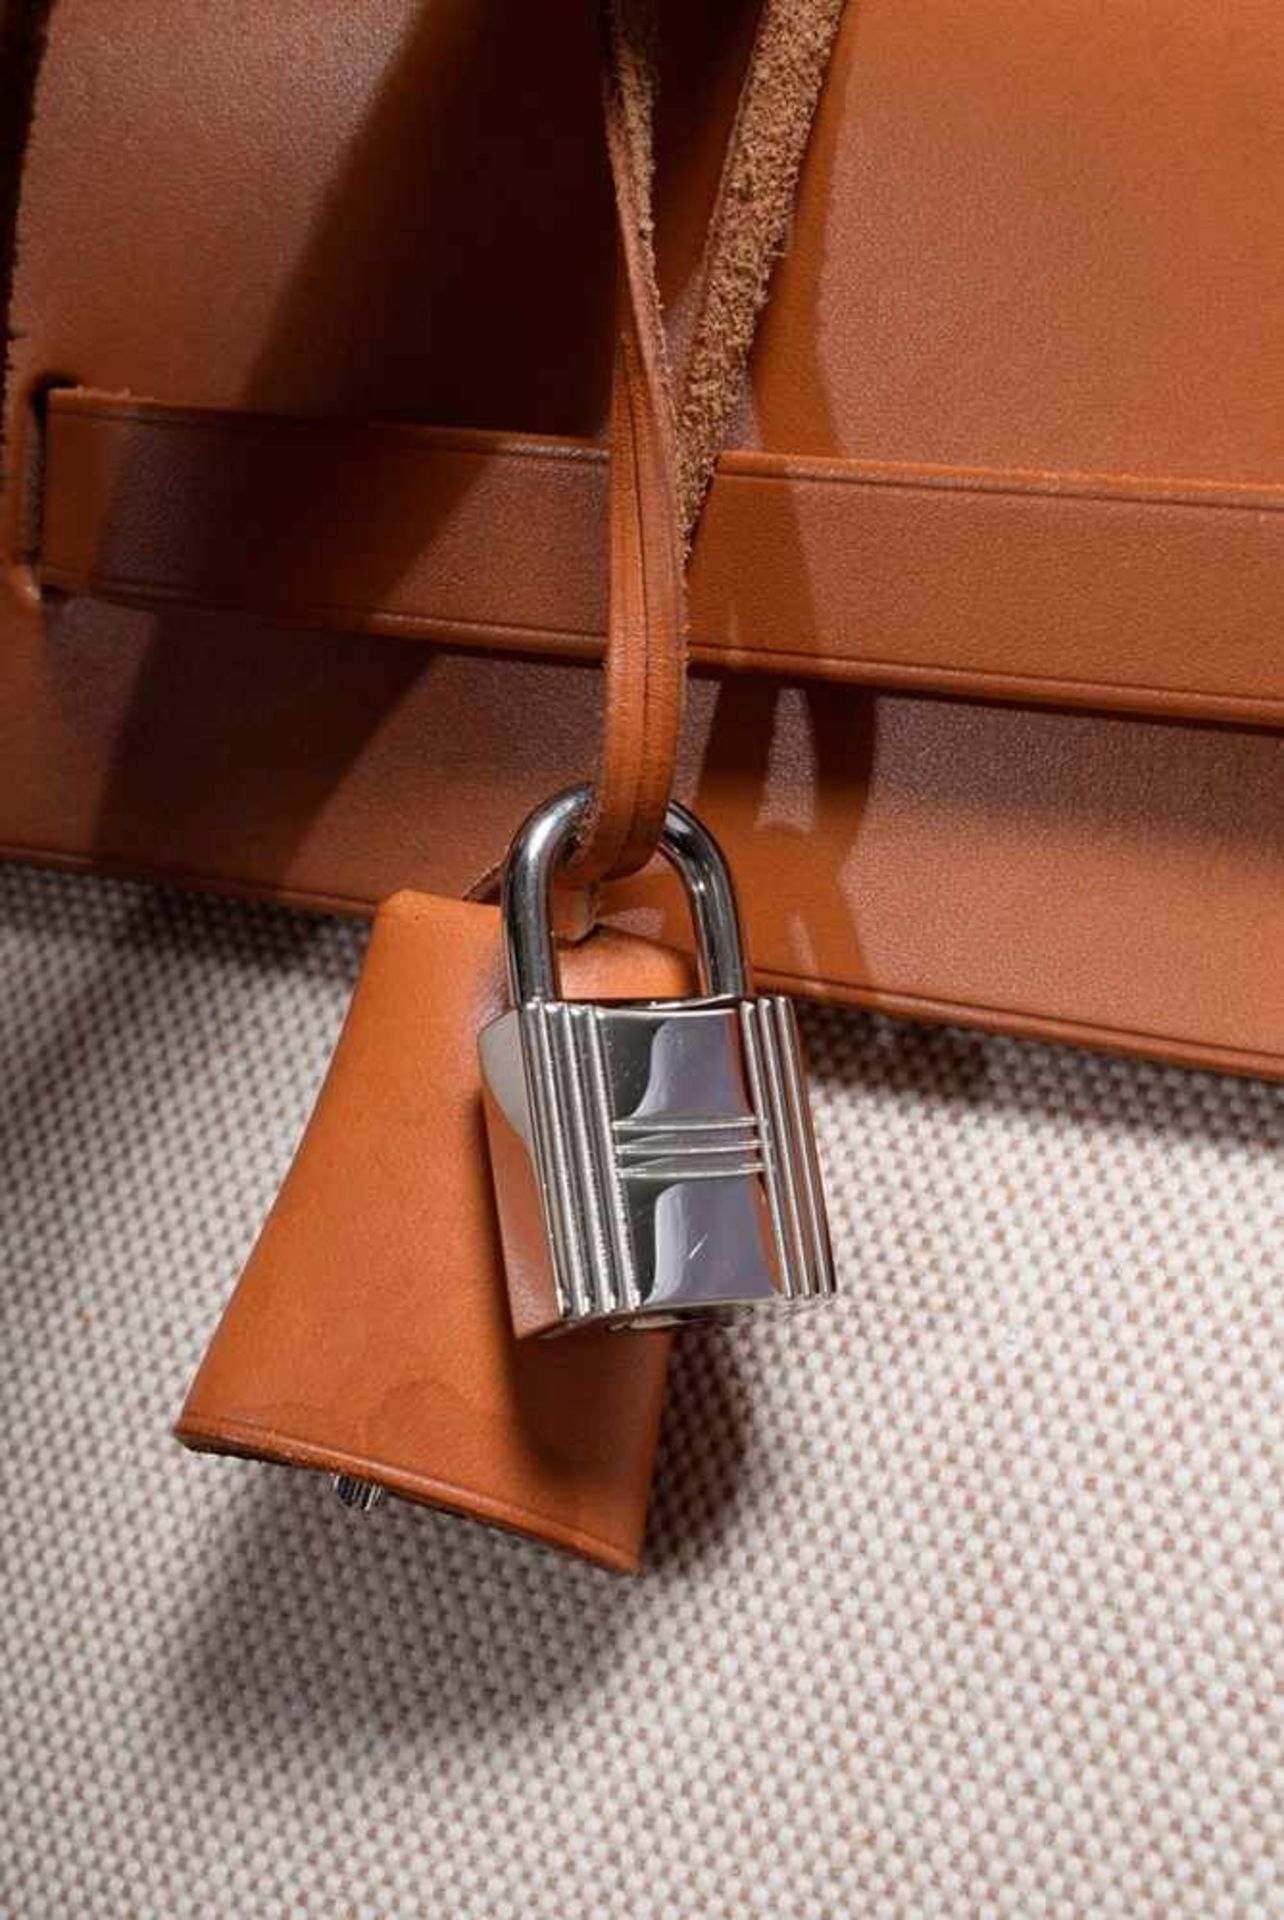 Hermès "Herbag" with natural leather and exchangeable canvas bags, 38x30/43x37cm, traces of - Bild 5 aus 12